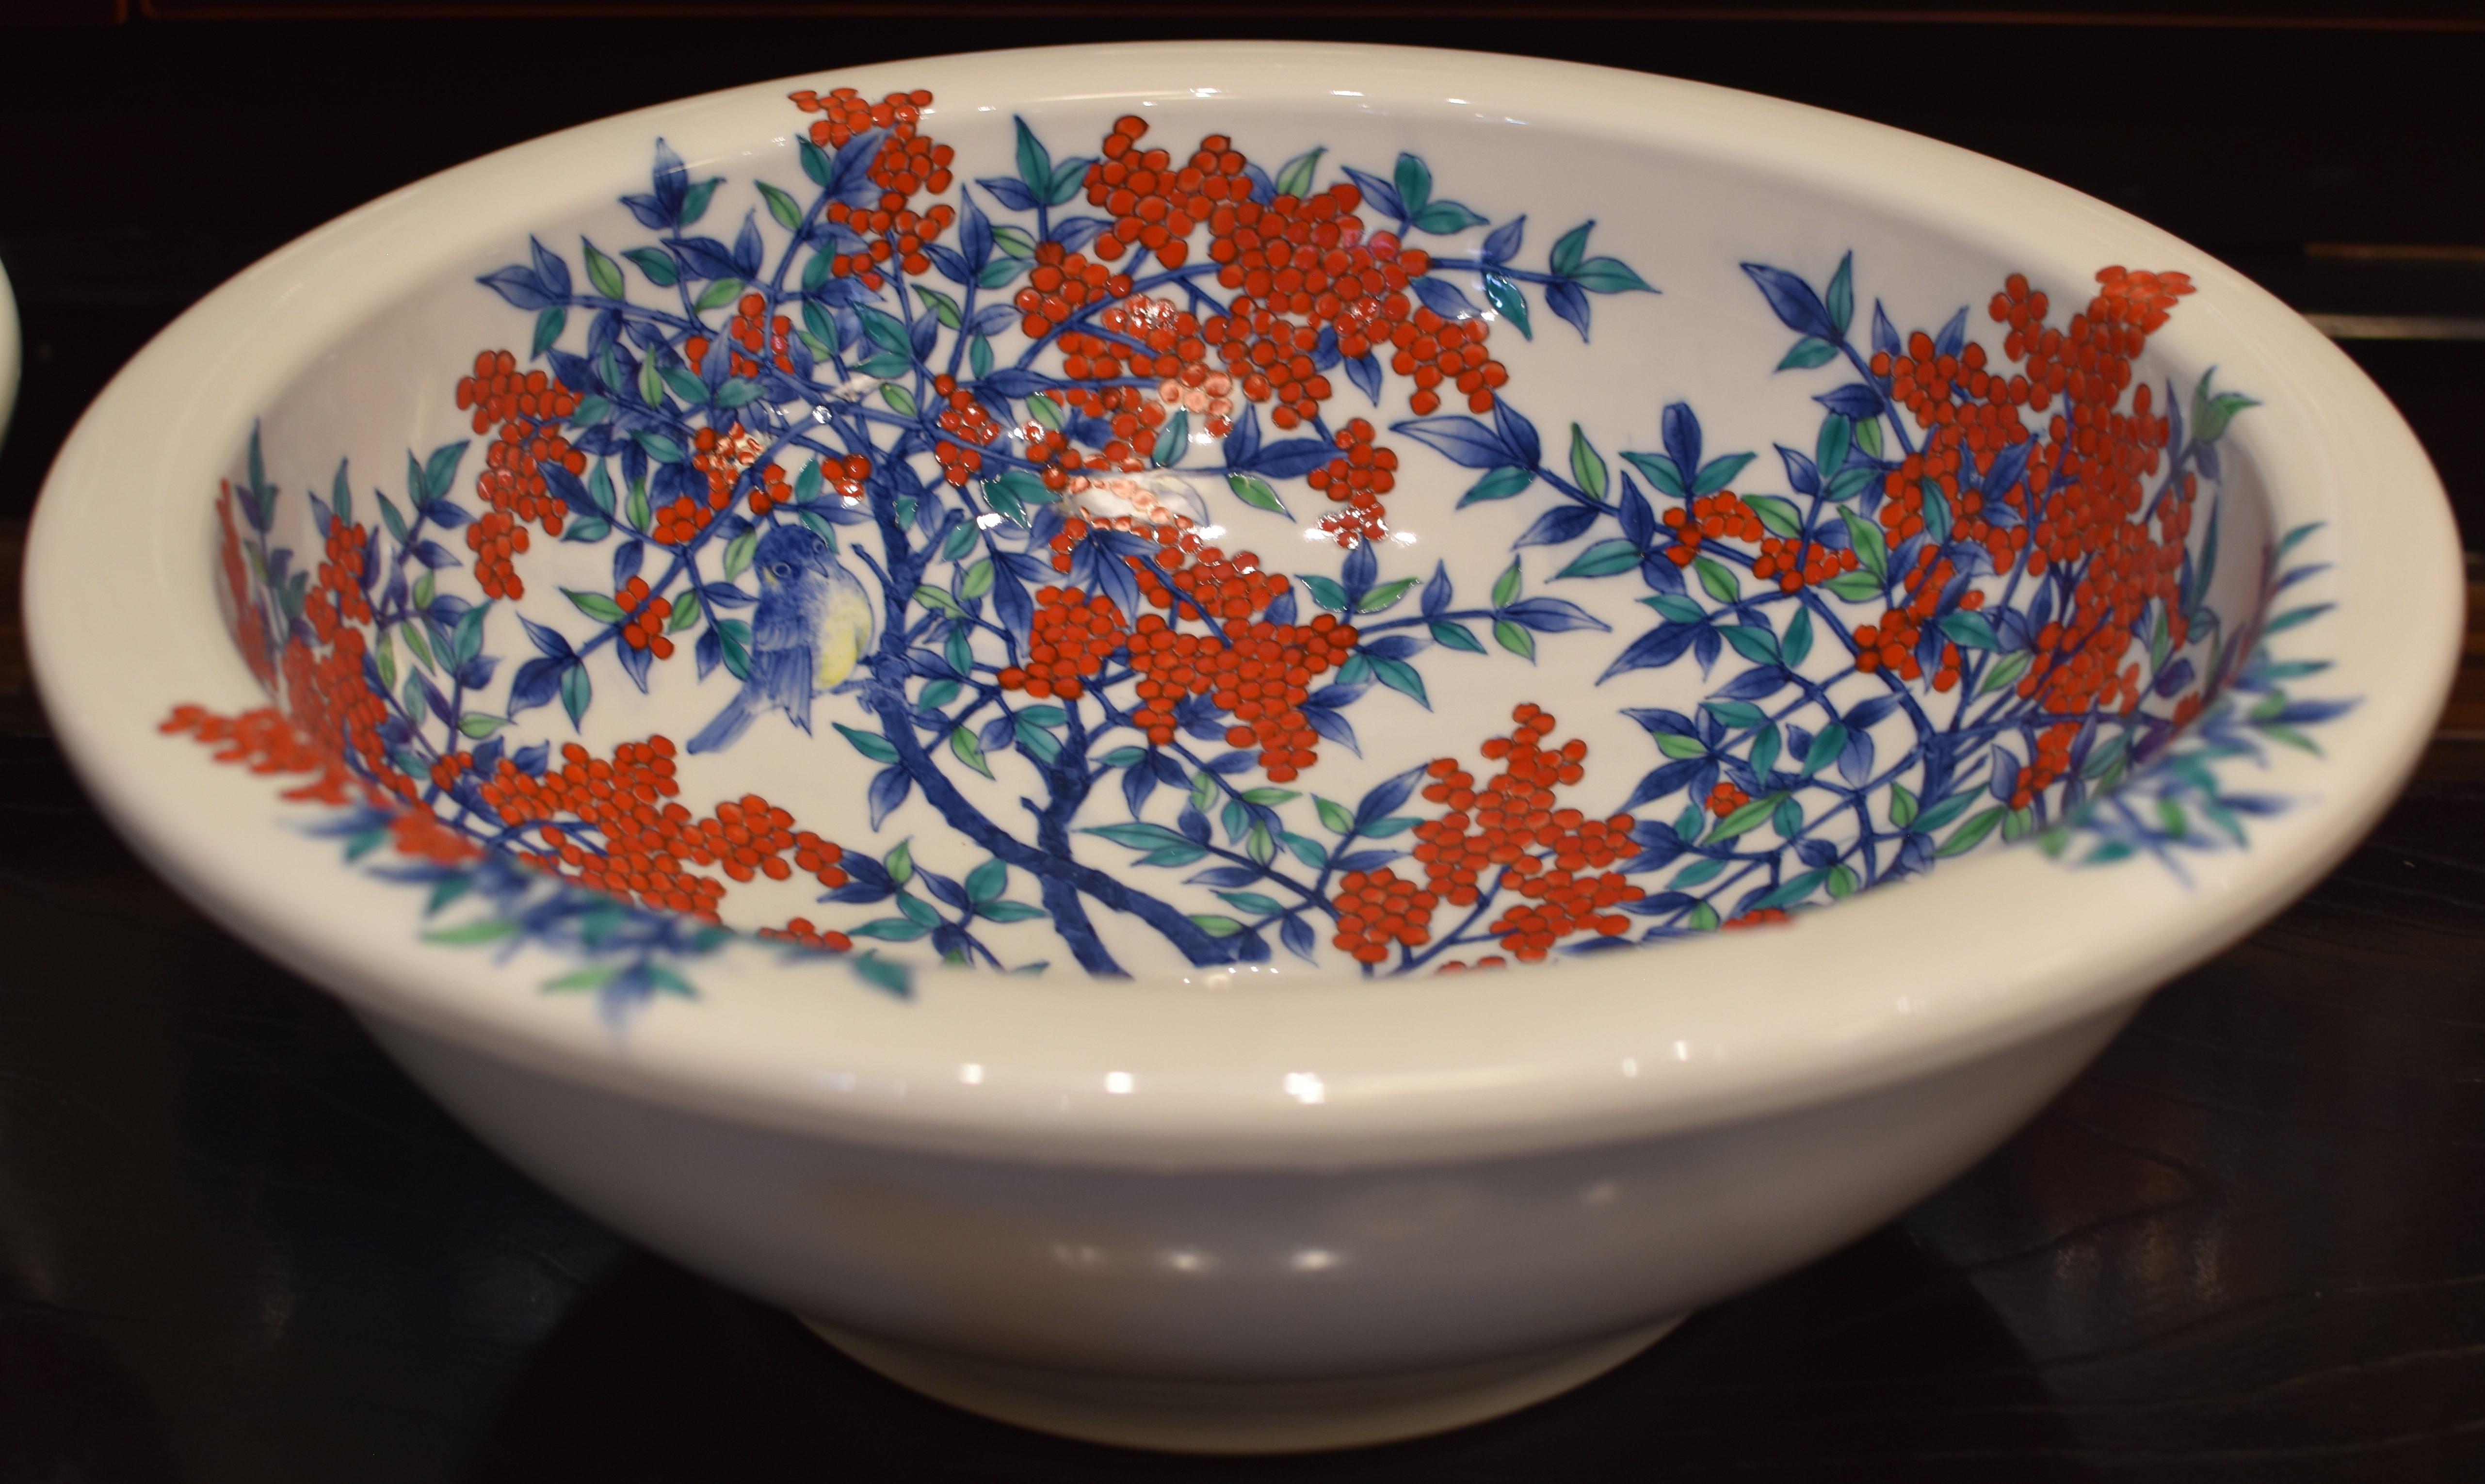 Contemporary Hand-Painted Porcelain Washbasin by Japanese Master Artist 4